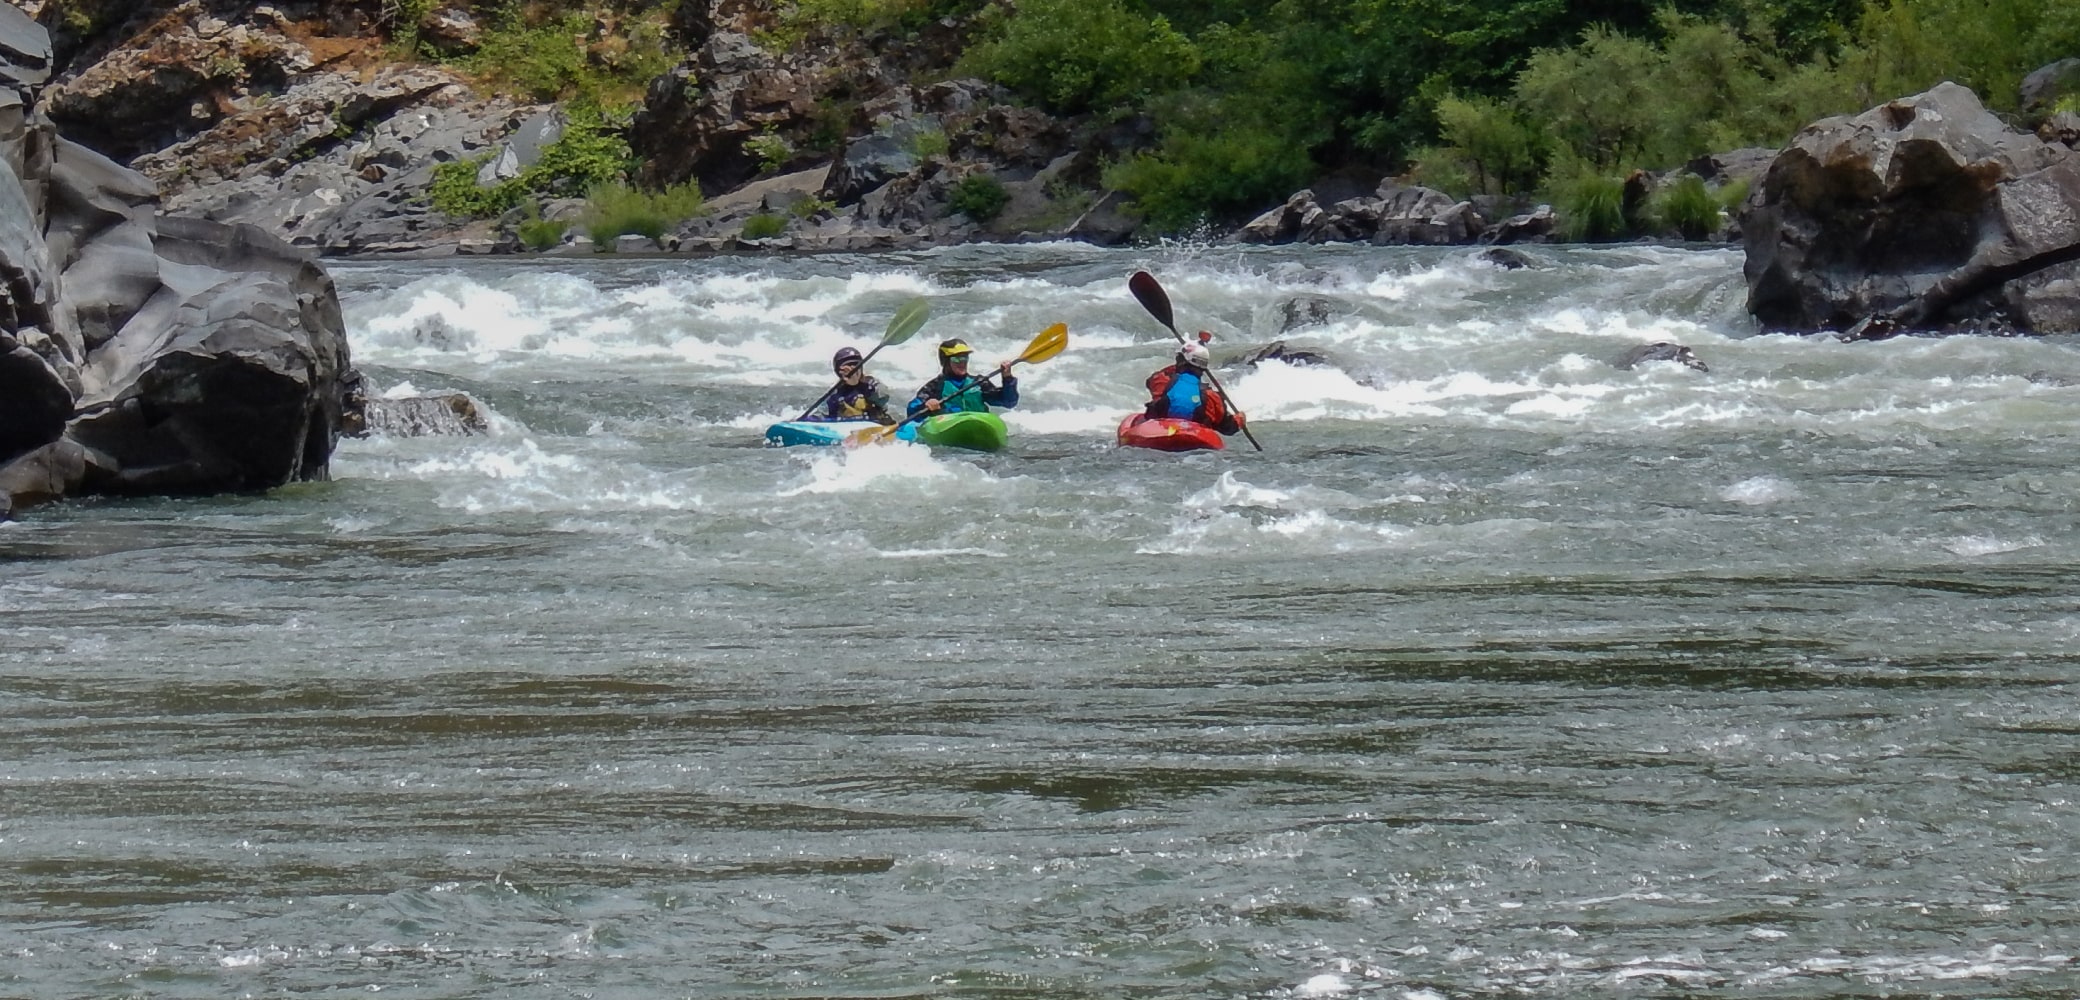 Three different kayakers navigating rapids on the Rogue River in Oregon.